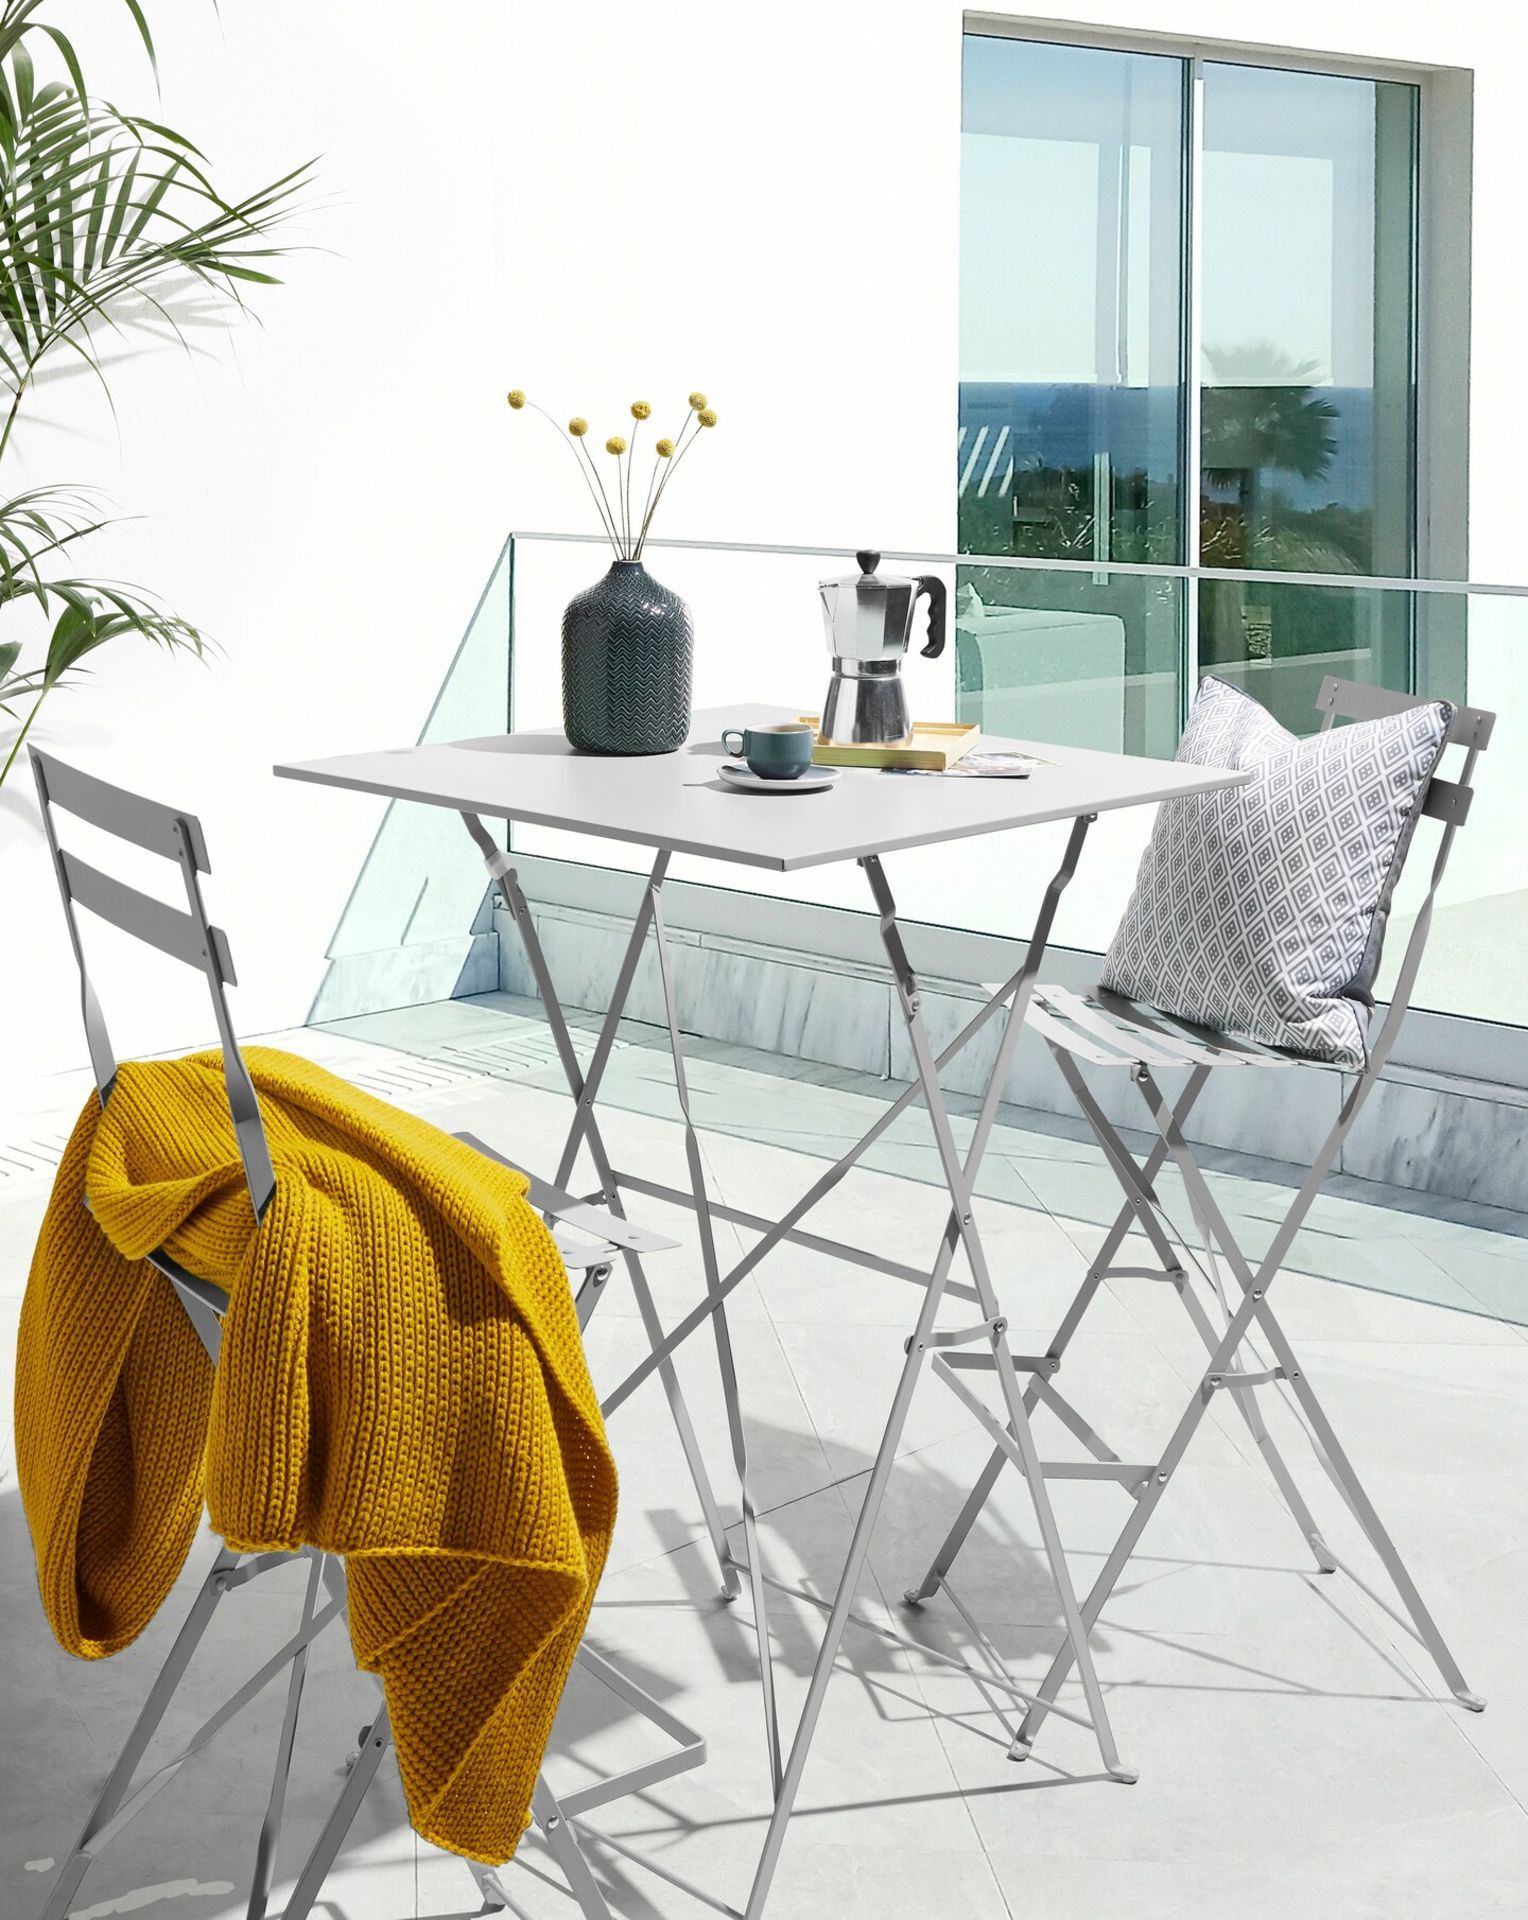 BRAND NEW Palma Bistro Bar Set GREY. RRP £159 EACH. Liven up your garden or balcony with this pretty